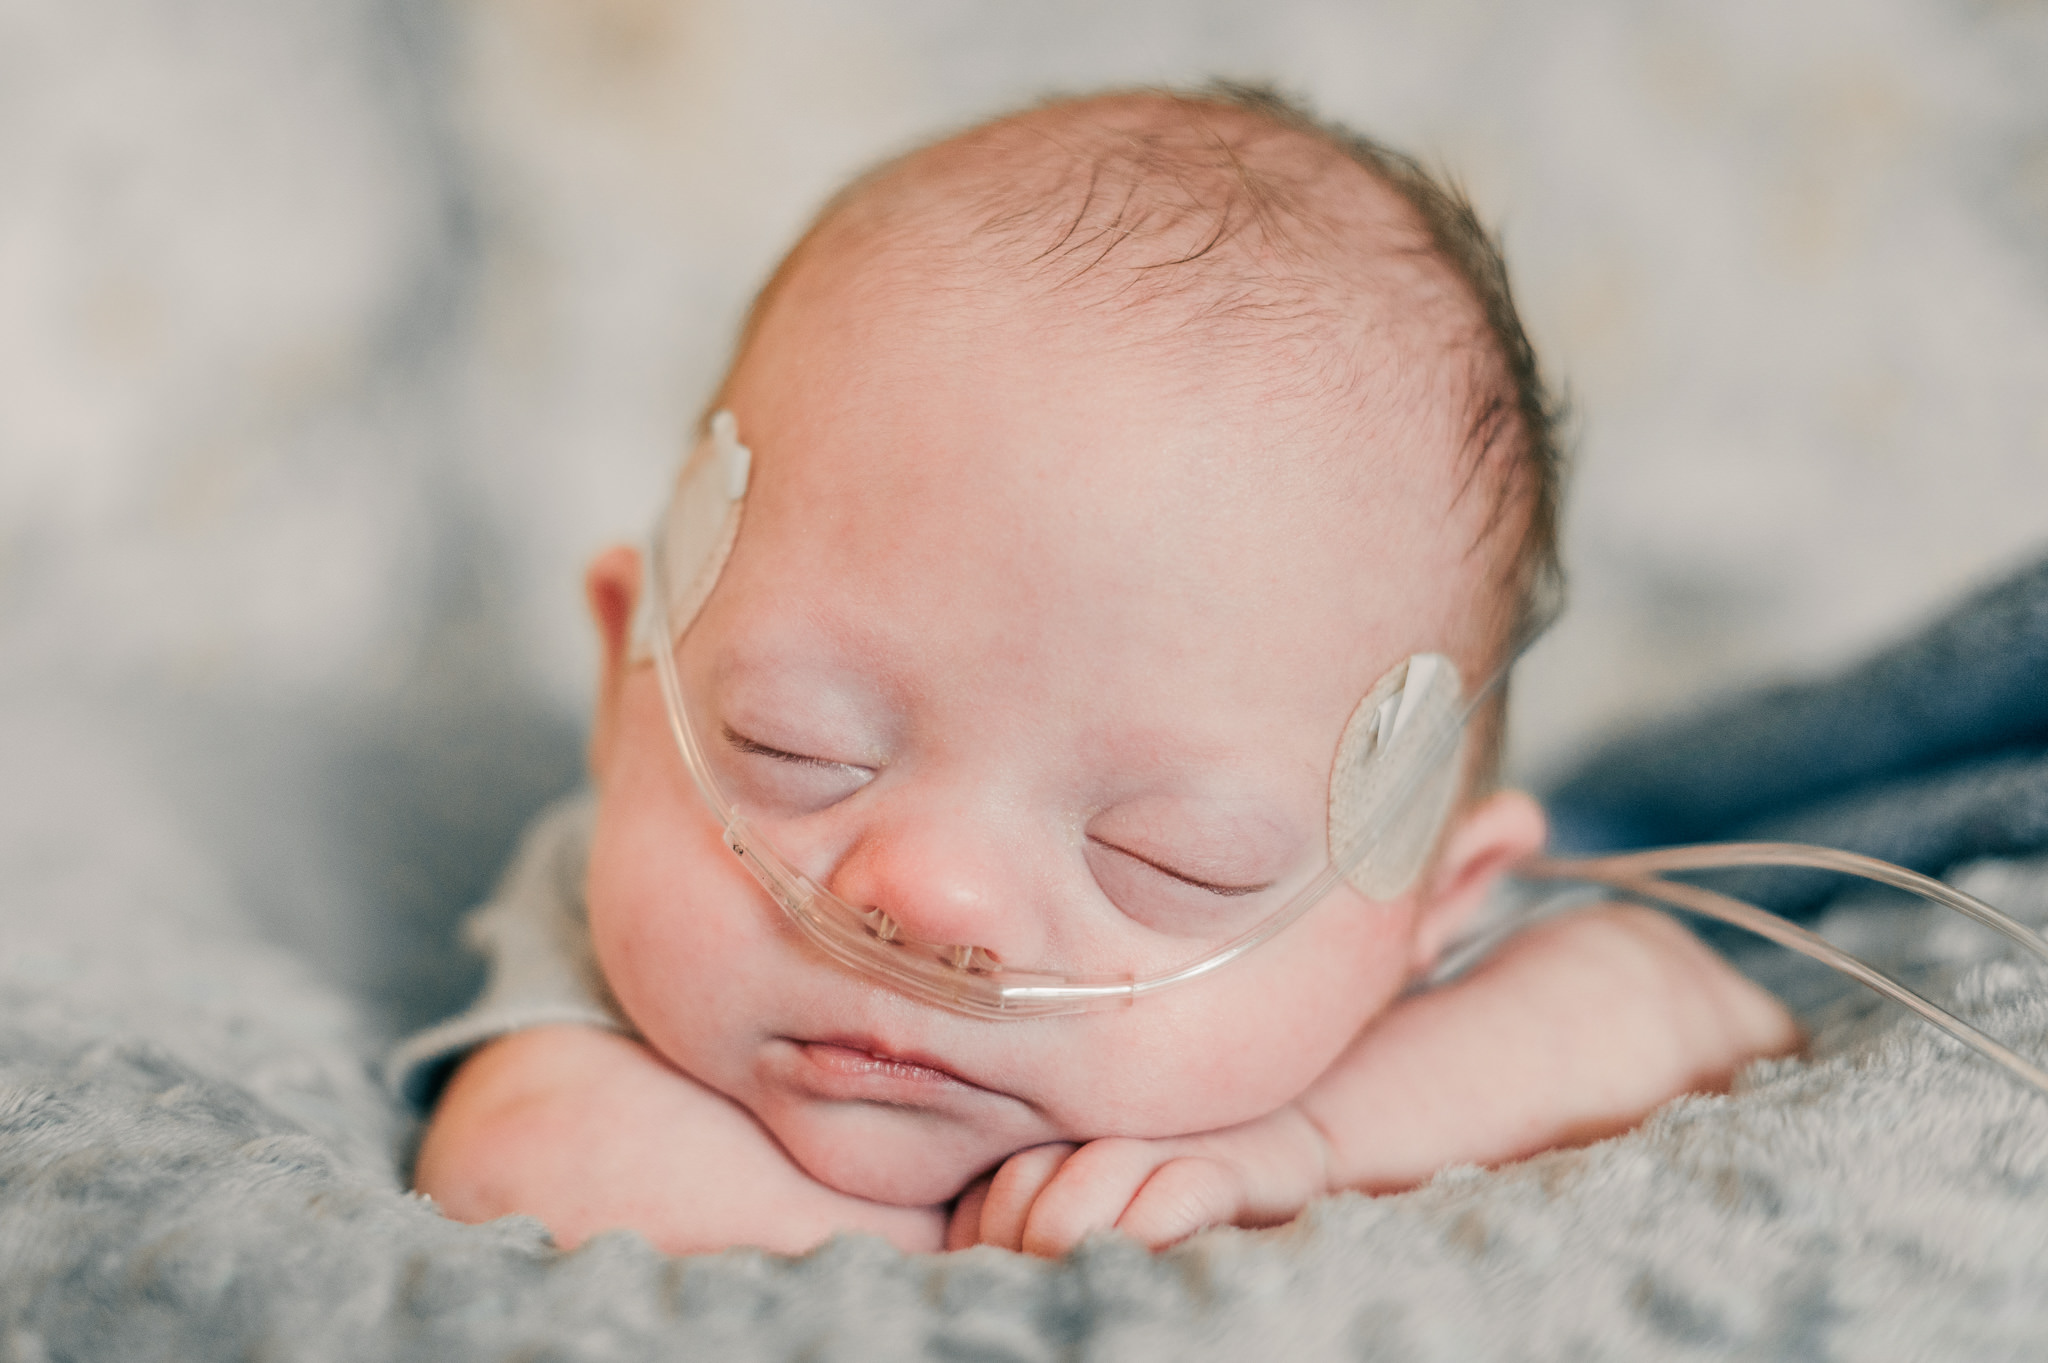 A tiny baby with Down syndrome peacefully rests with his head on his folded arms. He wears oxygen tubing and stickers on his face. Image taken by San Antonio special needs photographer Cassey Golden.